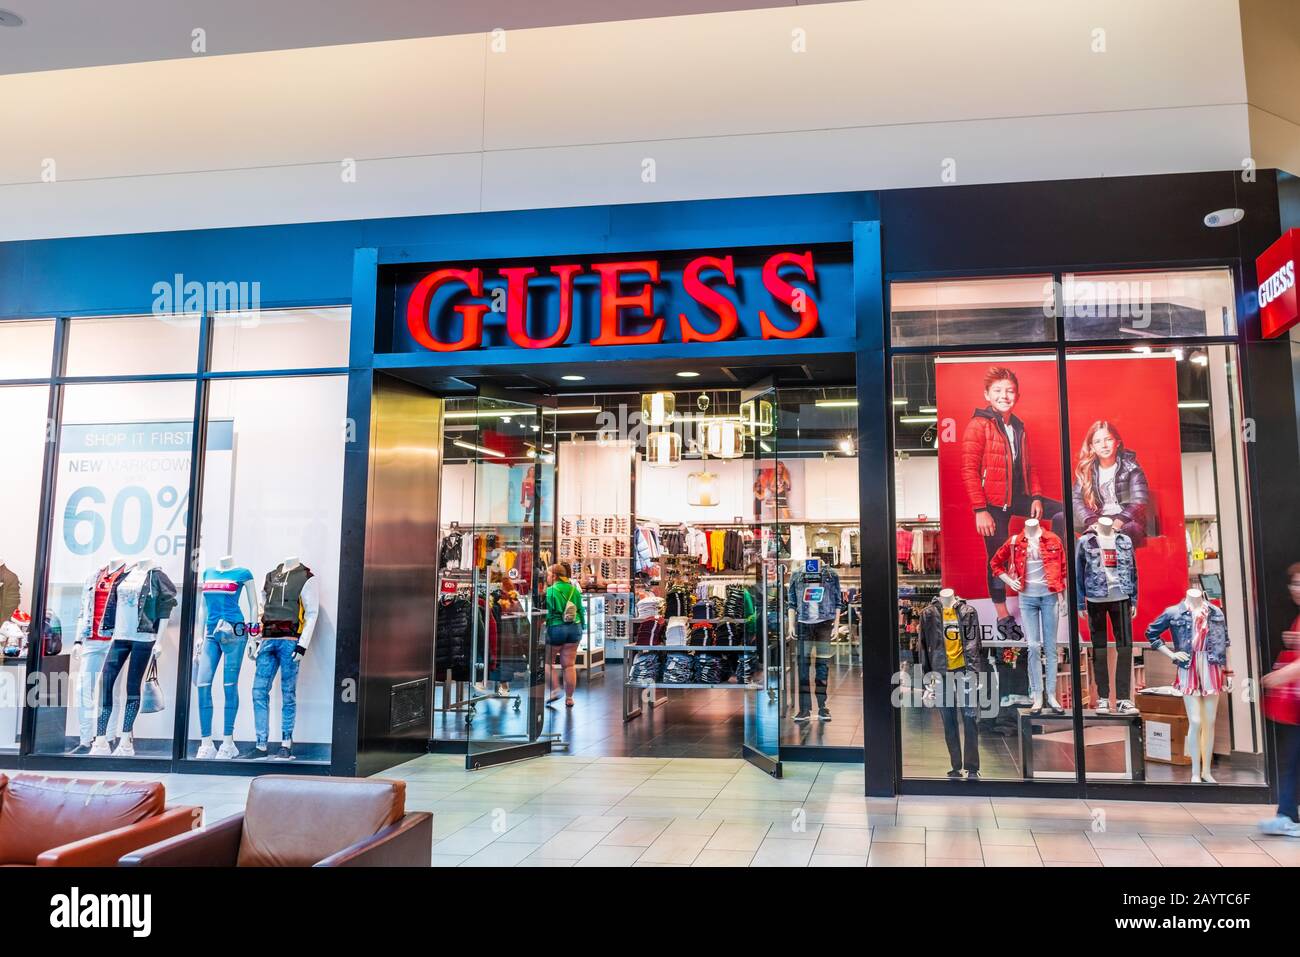 Jan 31, 2020 Milpitas / CA / USA - store in a South San Francisco Bay area mall; Guess (styled as GUESS or Guess?) is an American clothing brand Photo - Alamy